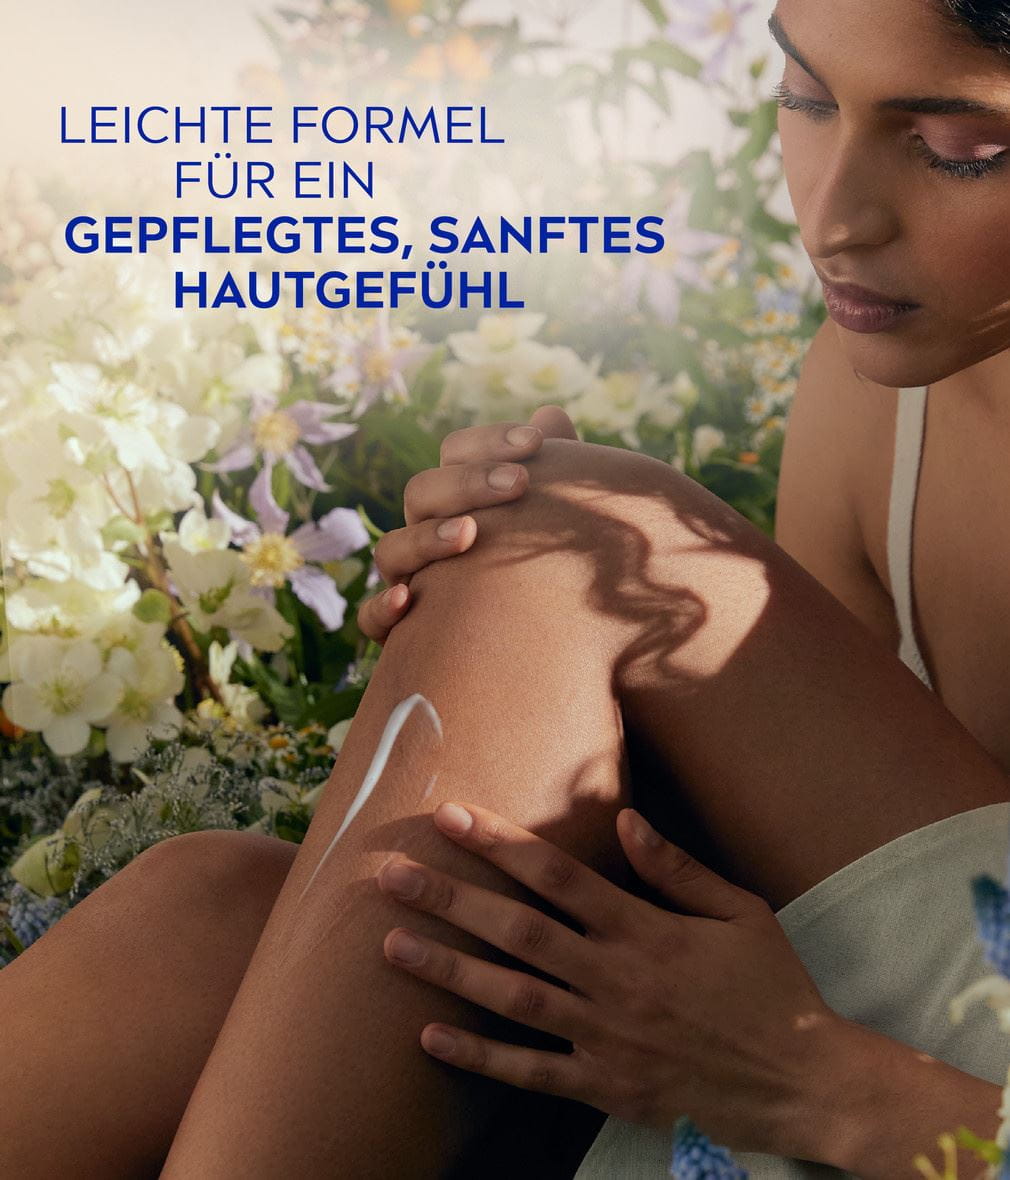 NIVEA Miracle Garden Body Lotion Product in use